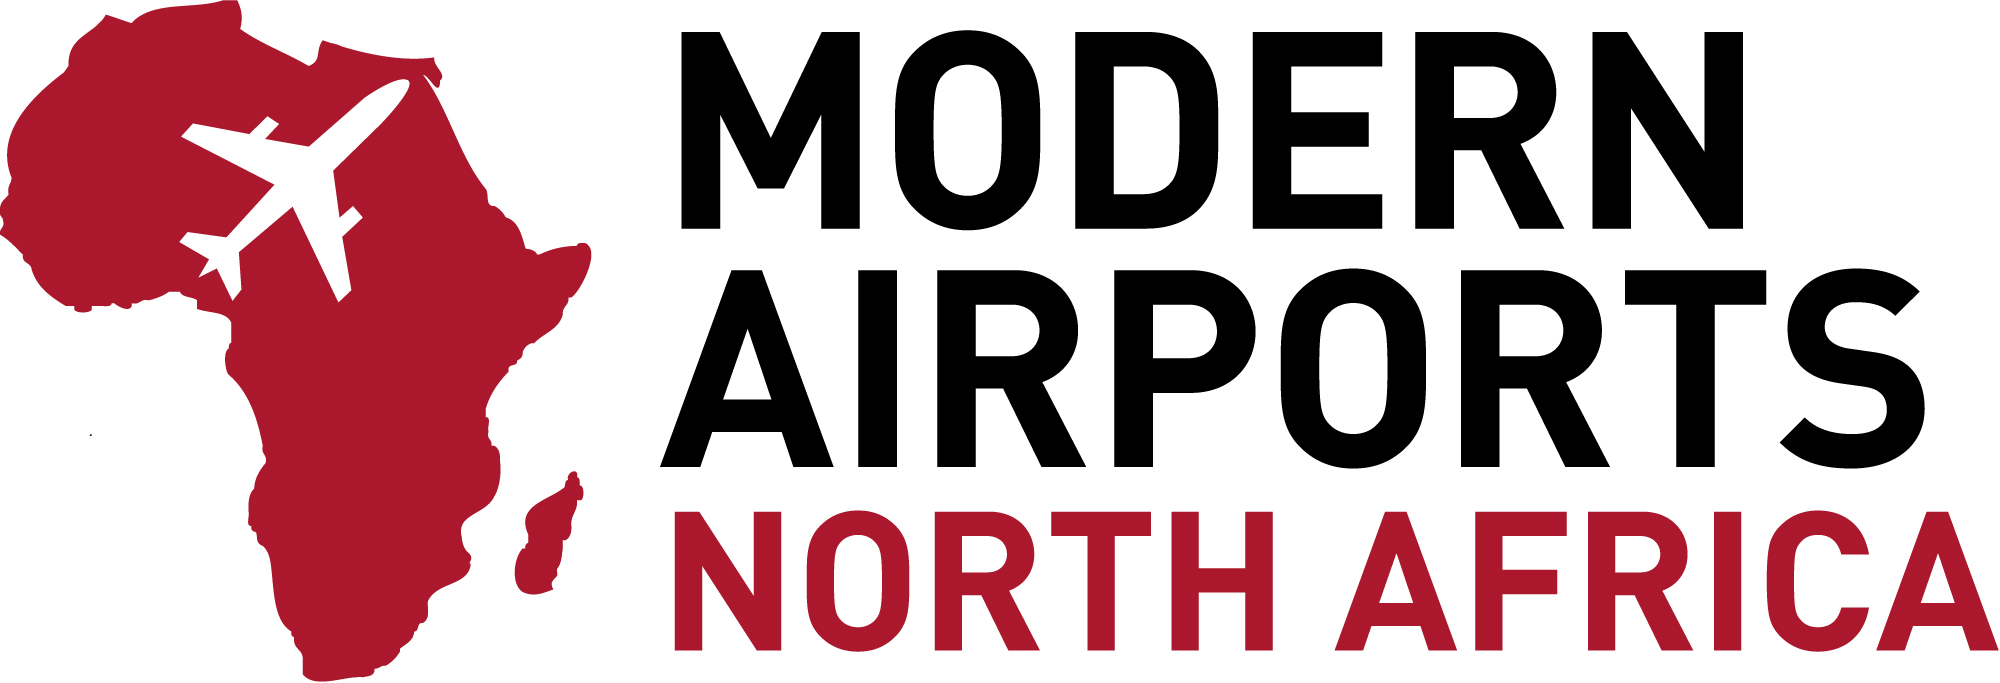 Modern Airports North Africa